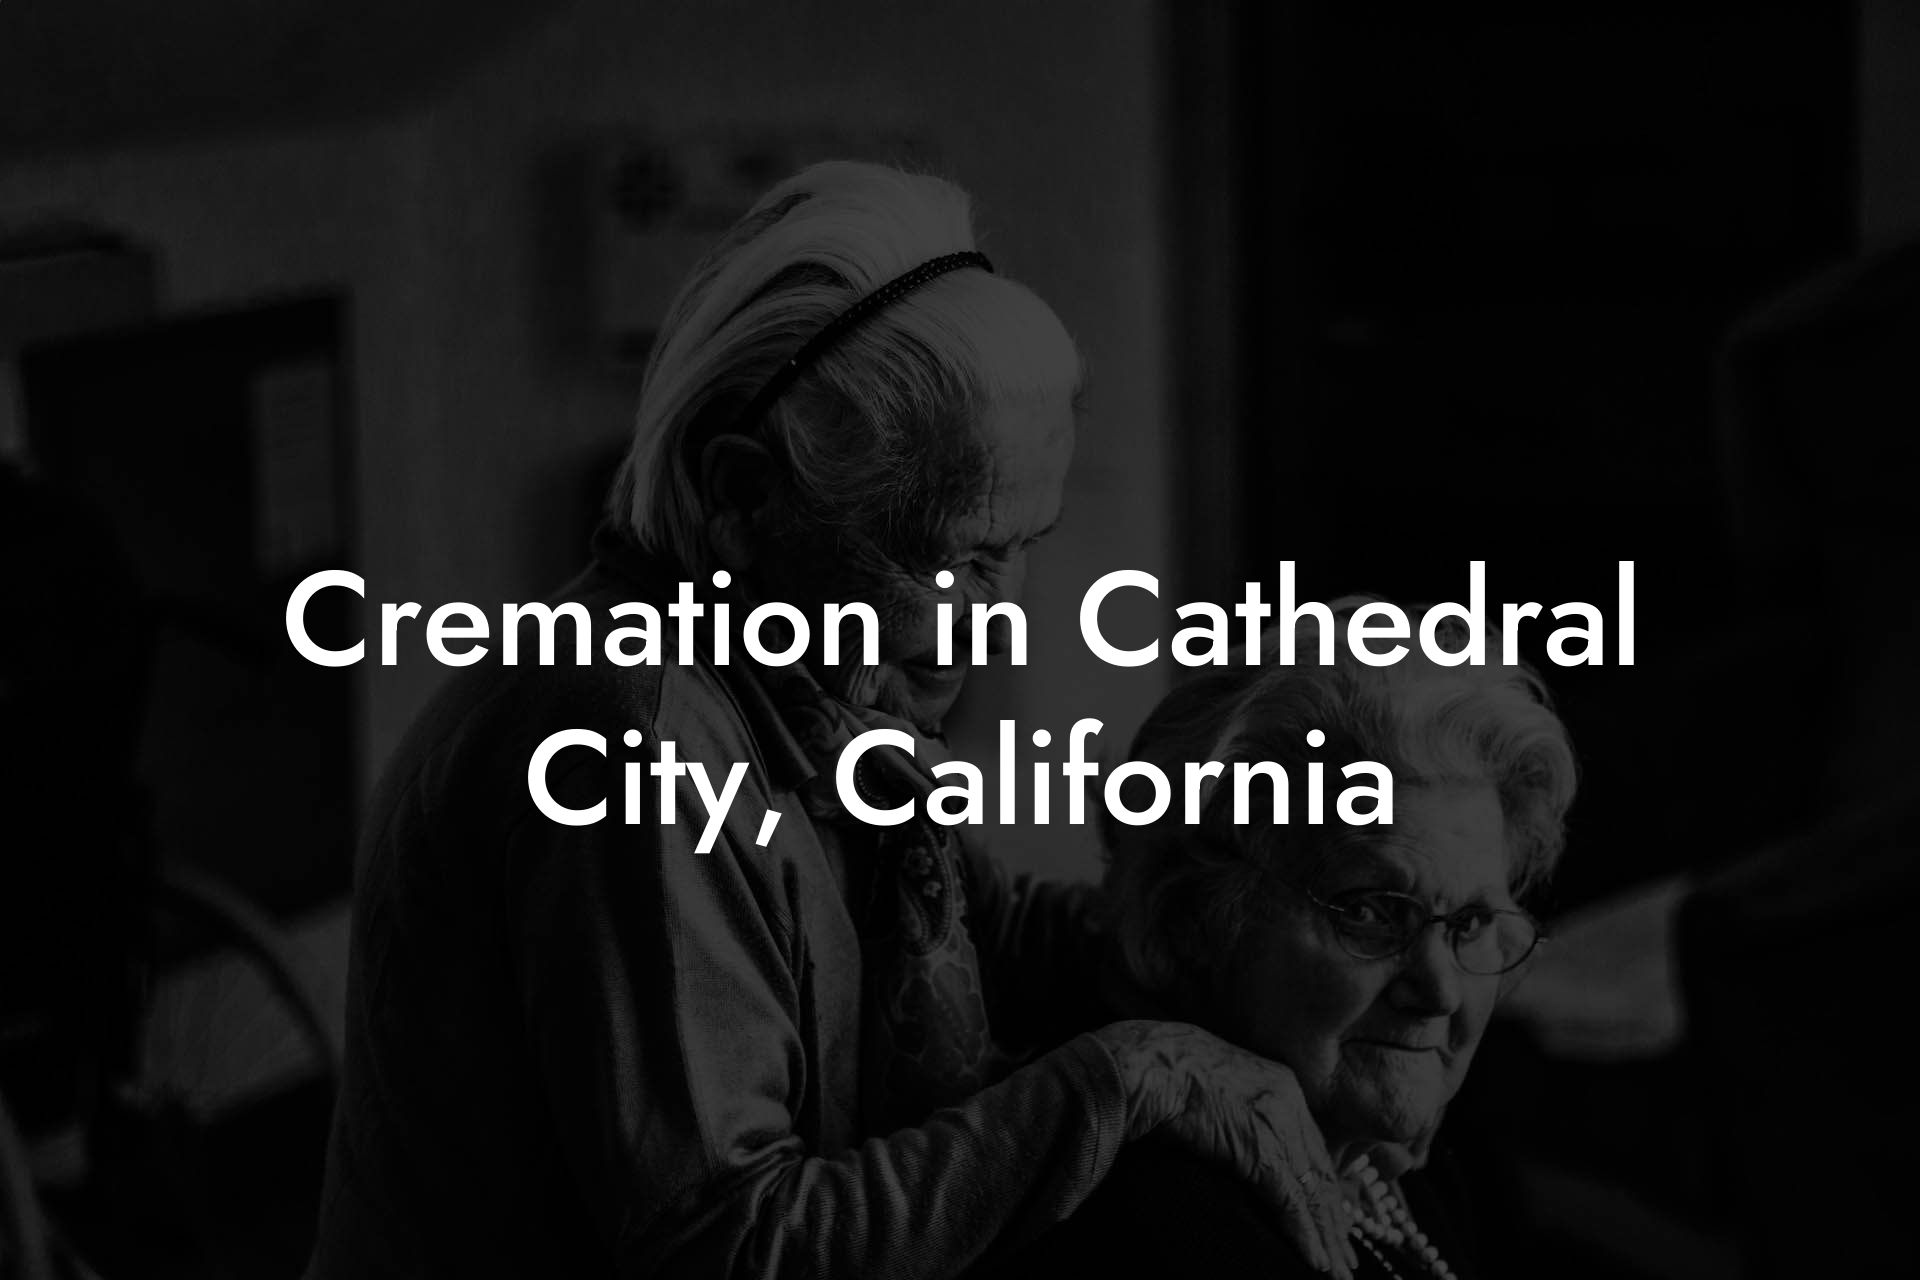 Cremation in Cathedral City, California